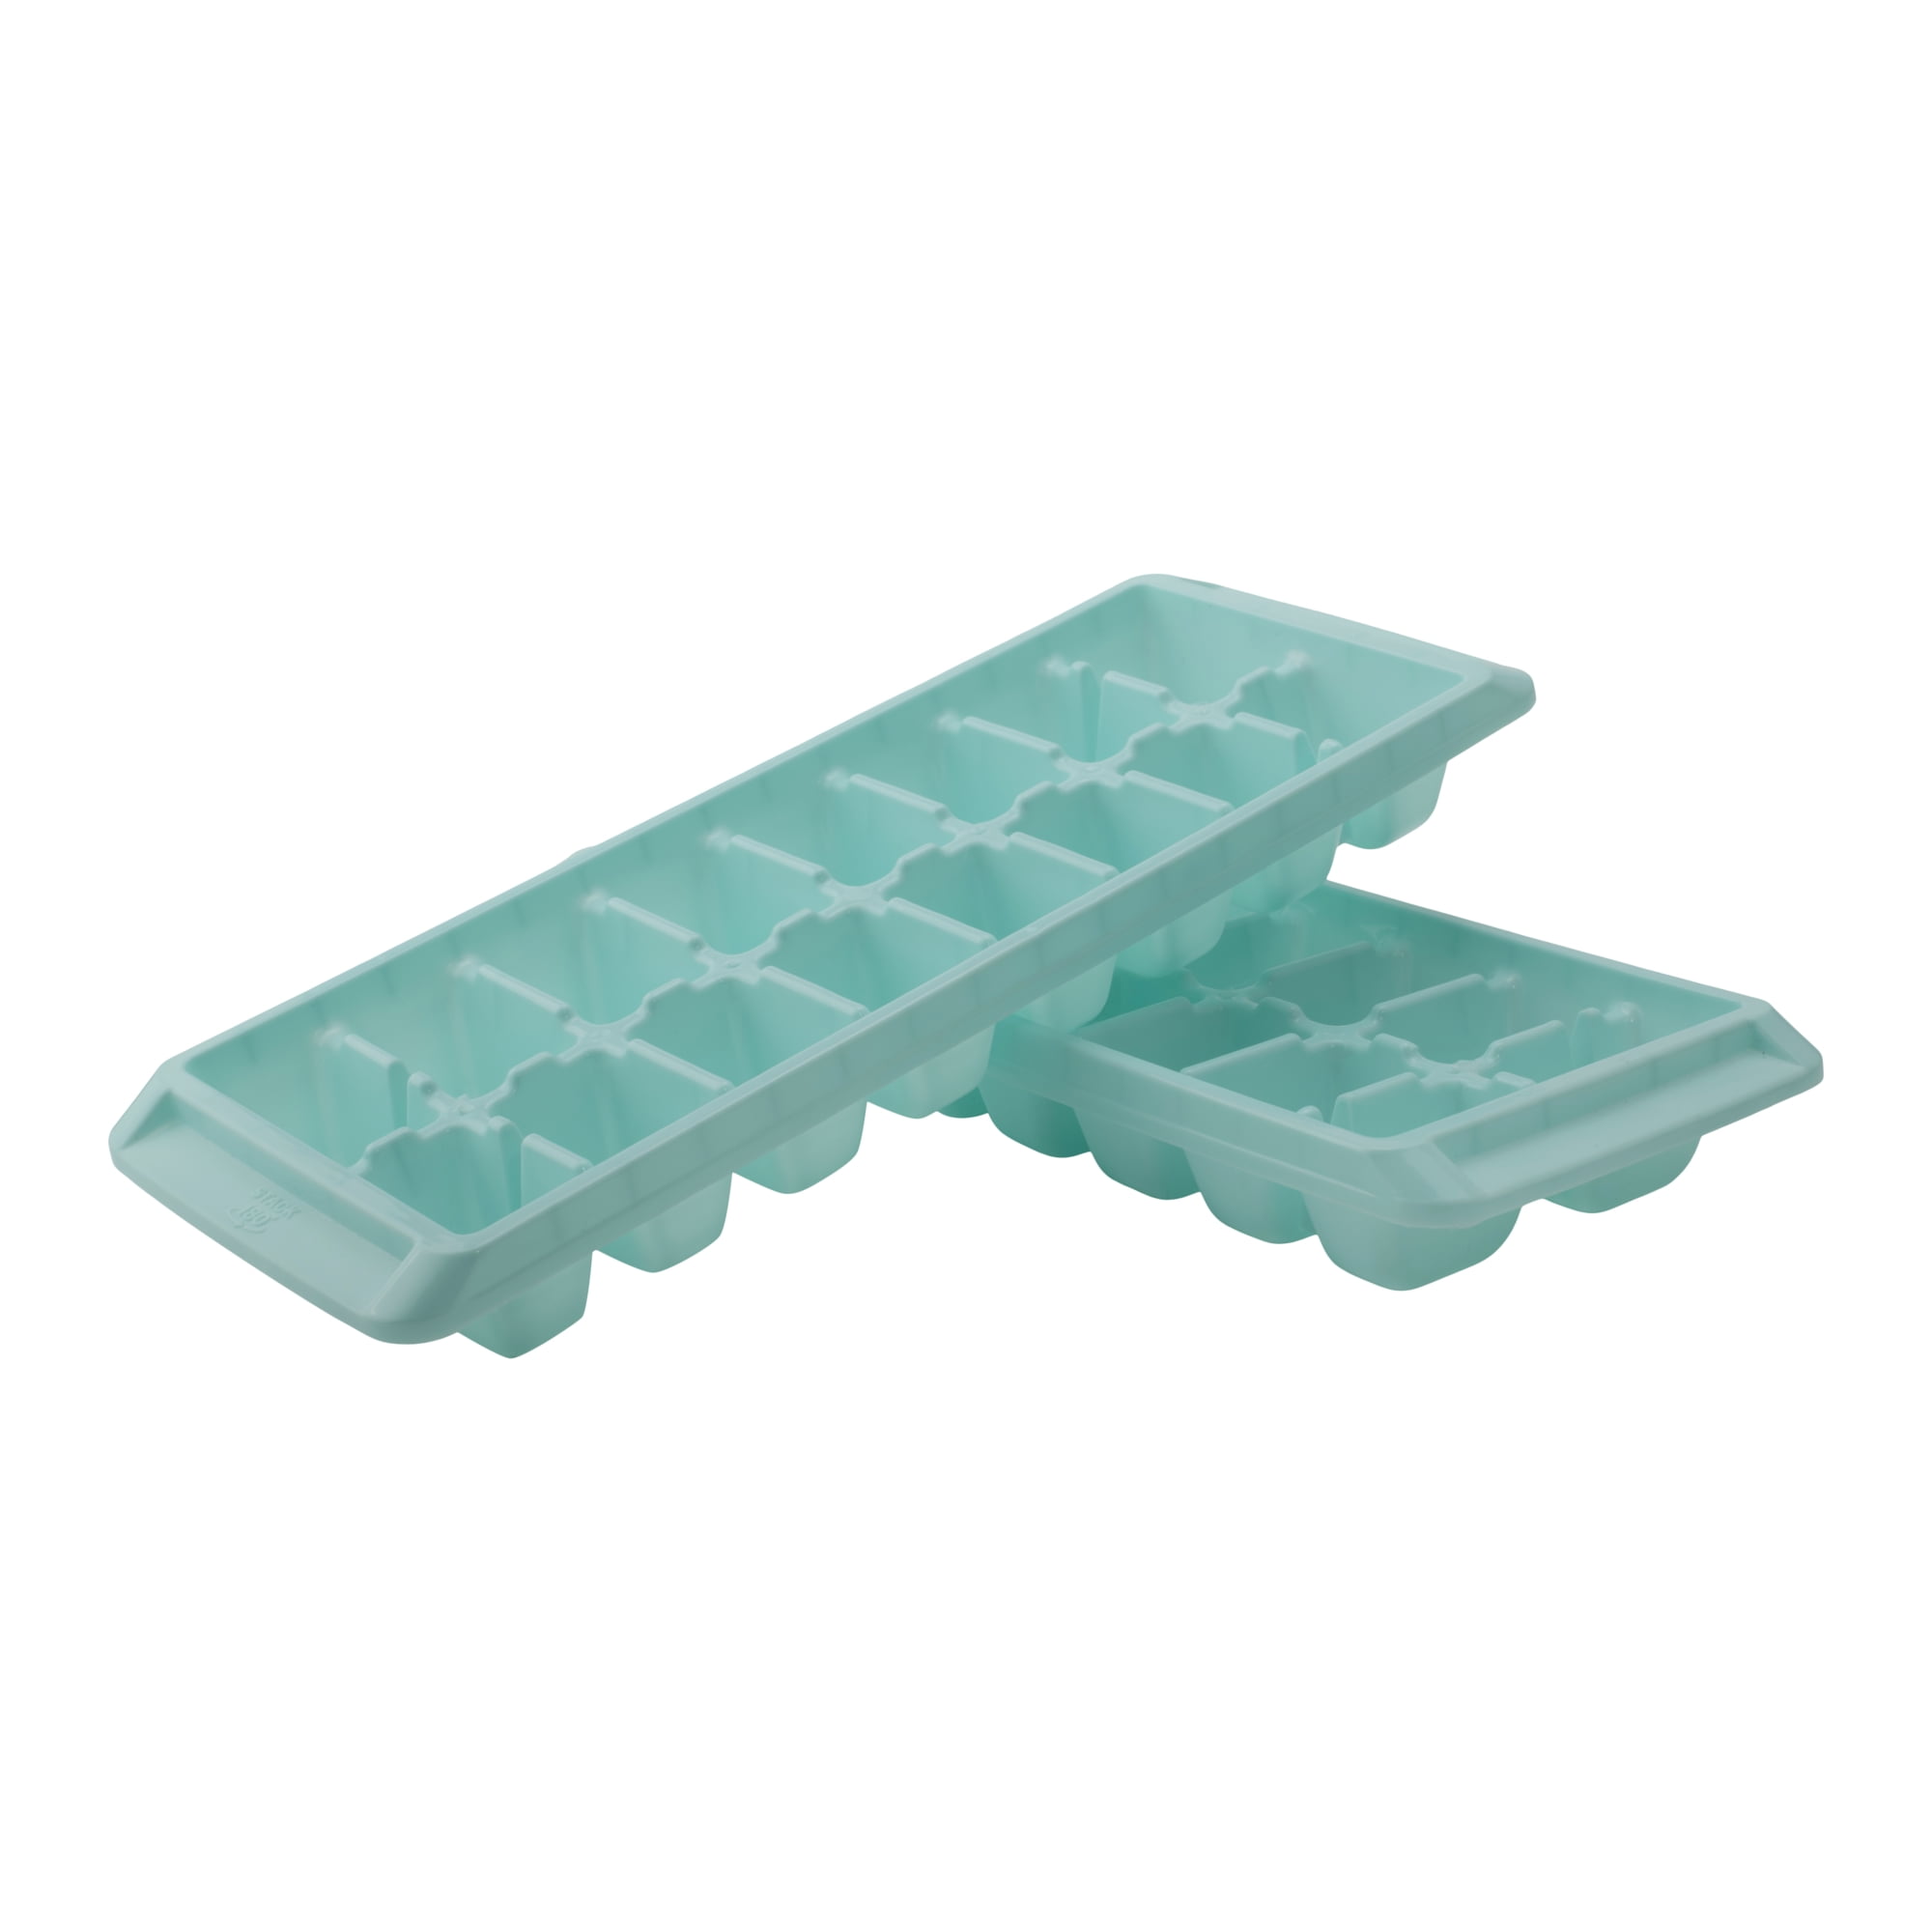 Buy butler trays Online in Angola at Low Prices at desertcart